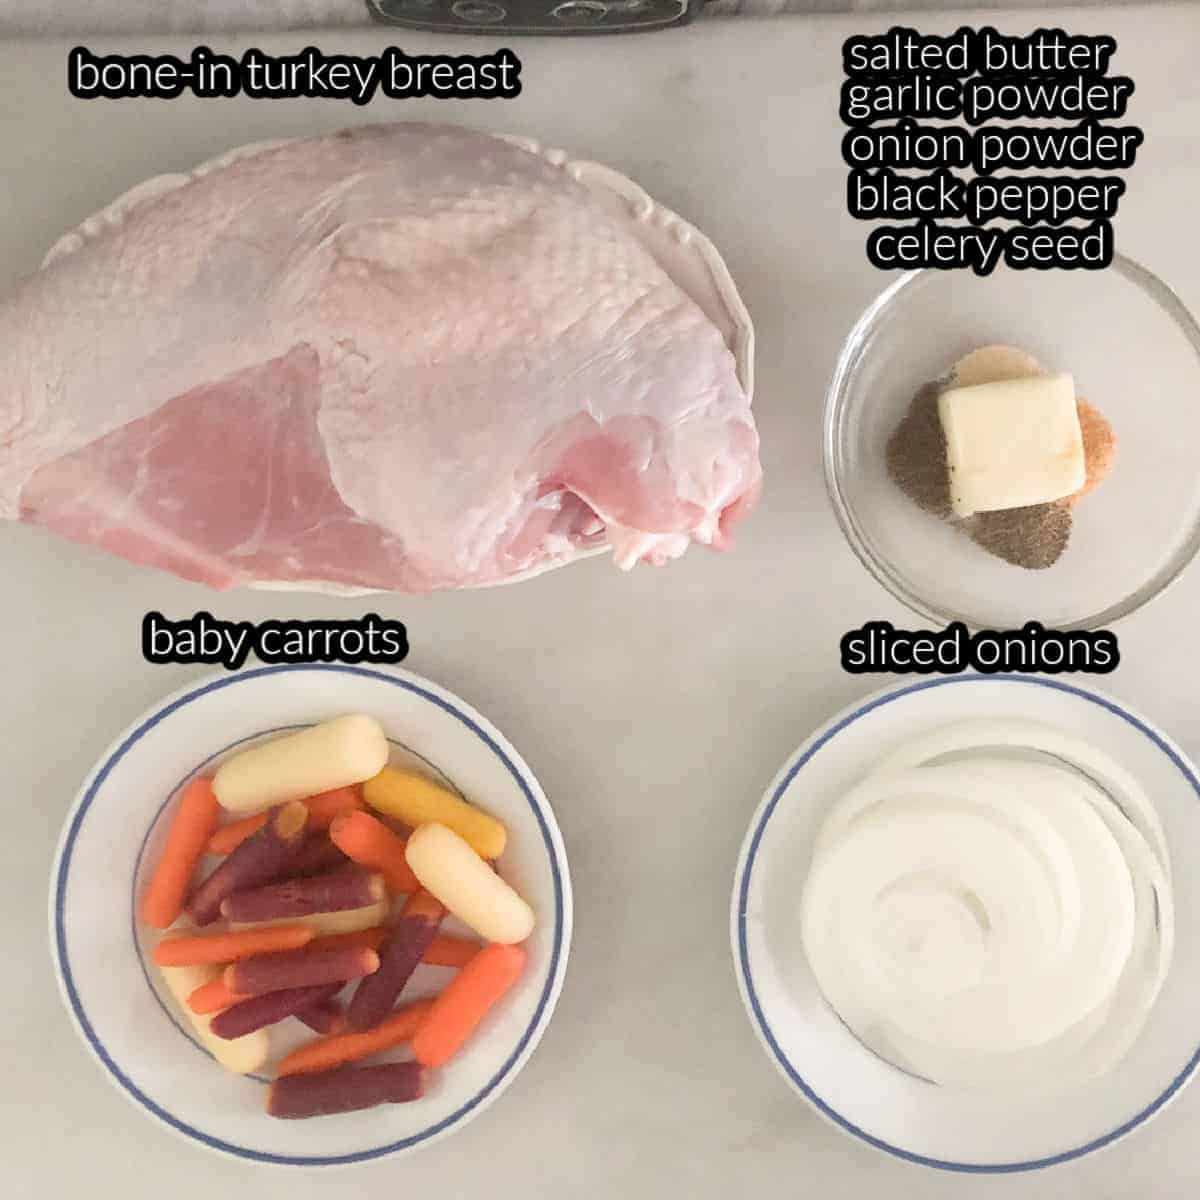 slow cooker turkey breast ingredients labeled